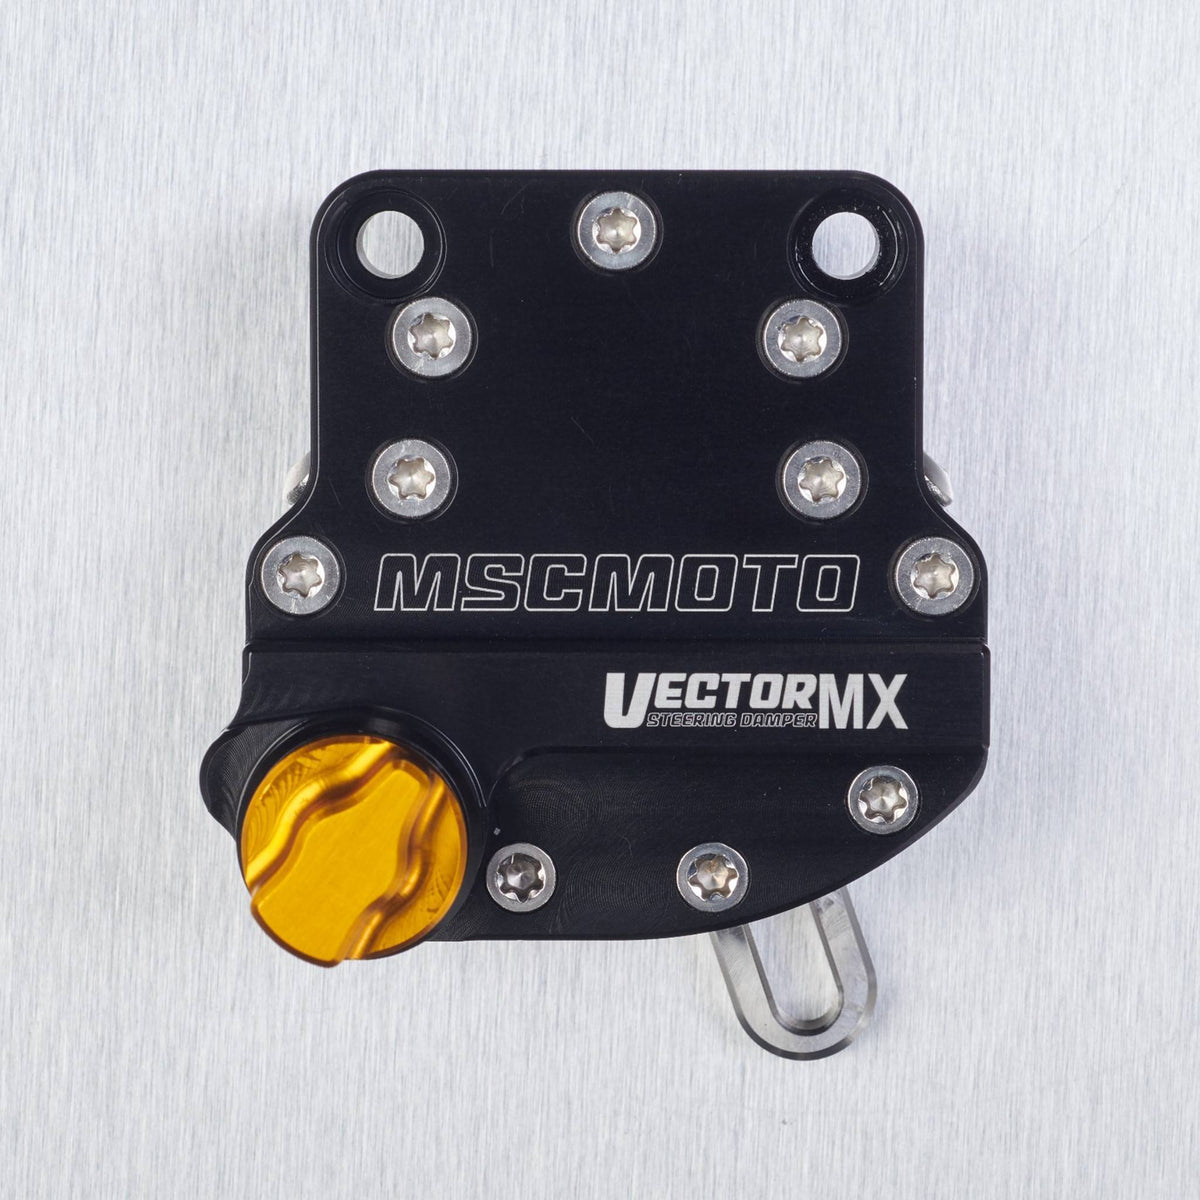 mscmotousa, VectorMX Steering Damper Kit &quot;Down Under&quot; Mount (VEC0010) - GAS GAS MC 85, YAMAHA YZ85, VEC0010, gas gas, gas-gas-2021-mc-85-esi2531830, vectormx, yamaha, yamaha-2013-yz85-esi4537843, , Imported and distributed in North &amp; South America by Lindeco Genuine Powersports.